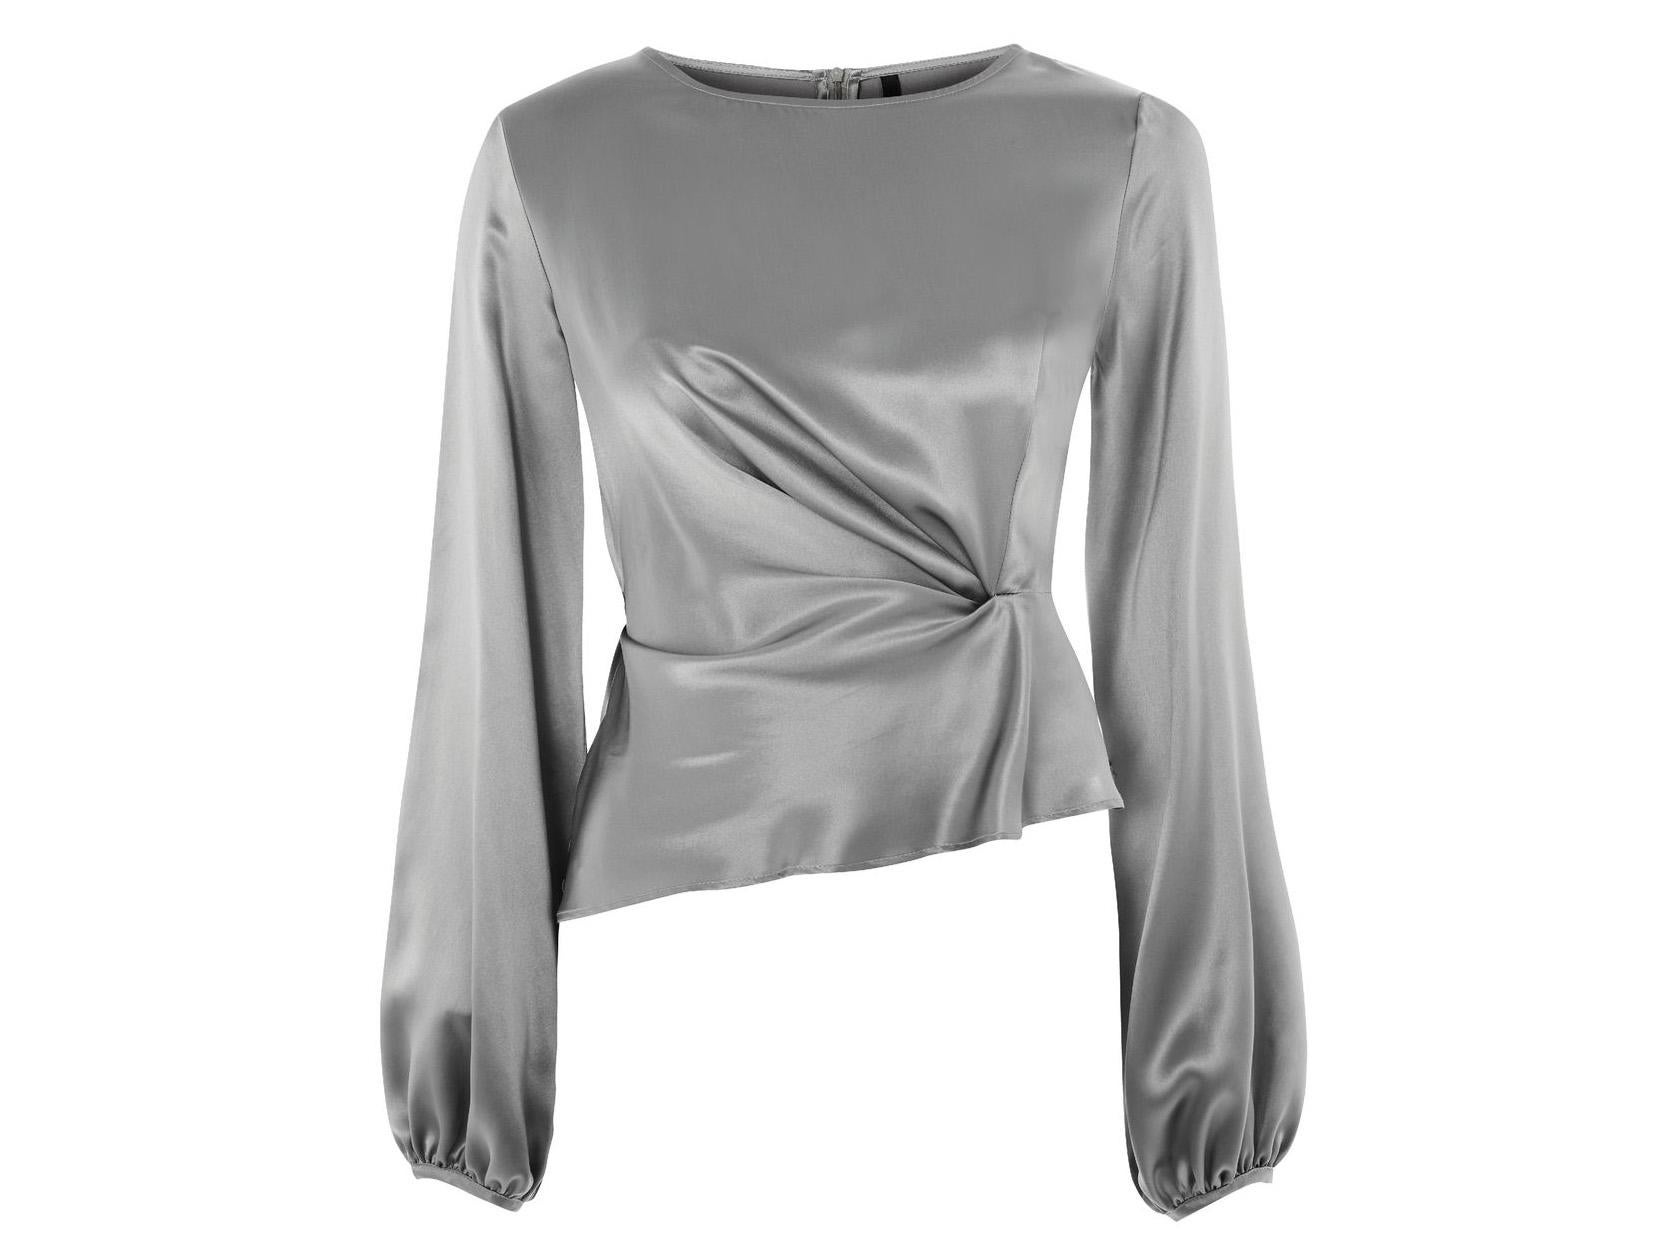 The stylish garments are diverse and distinct such as the Satin Tuck Blouse by Boutique, £69, Topshop